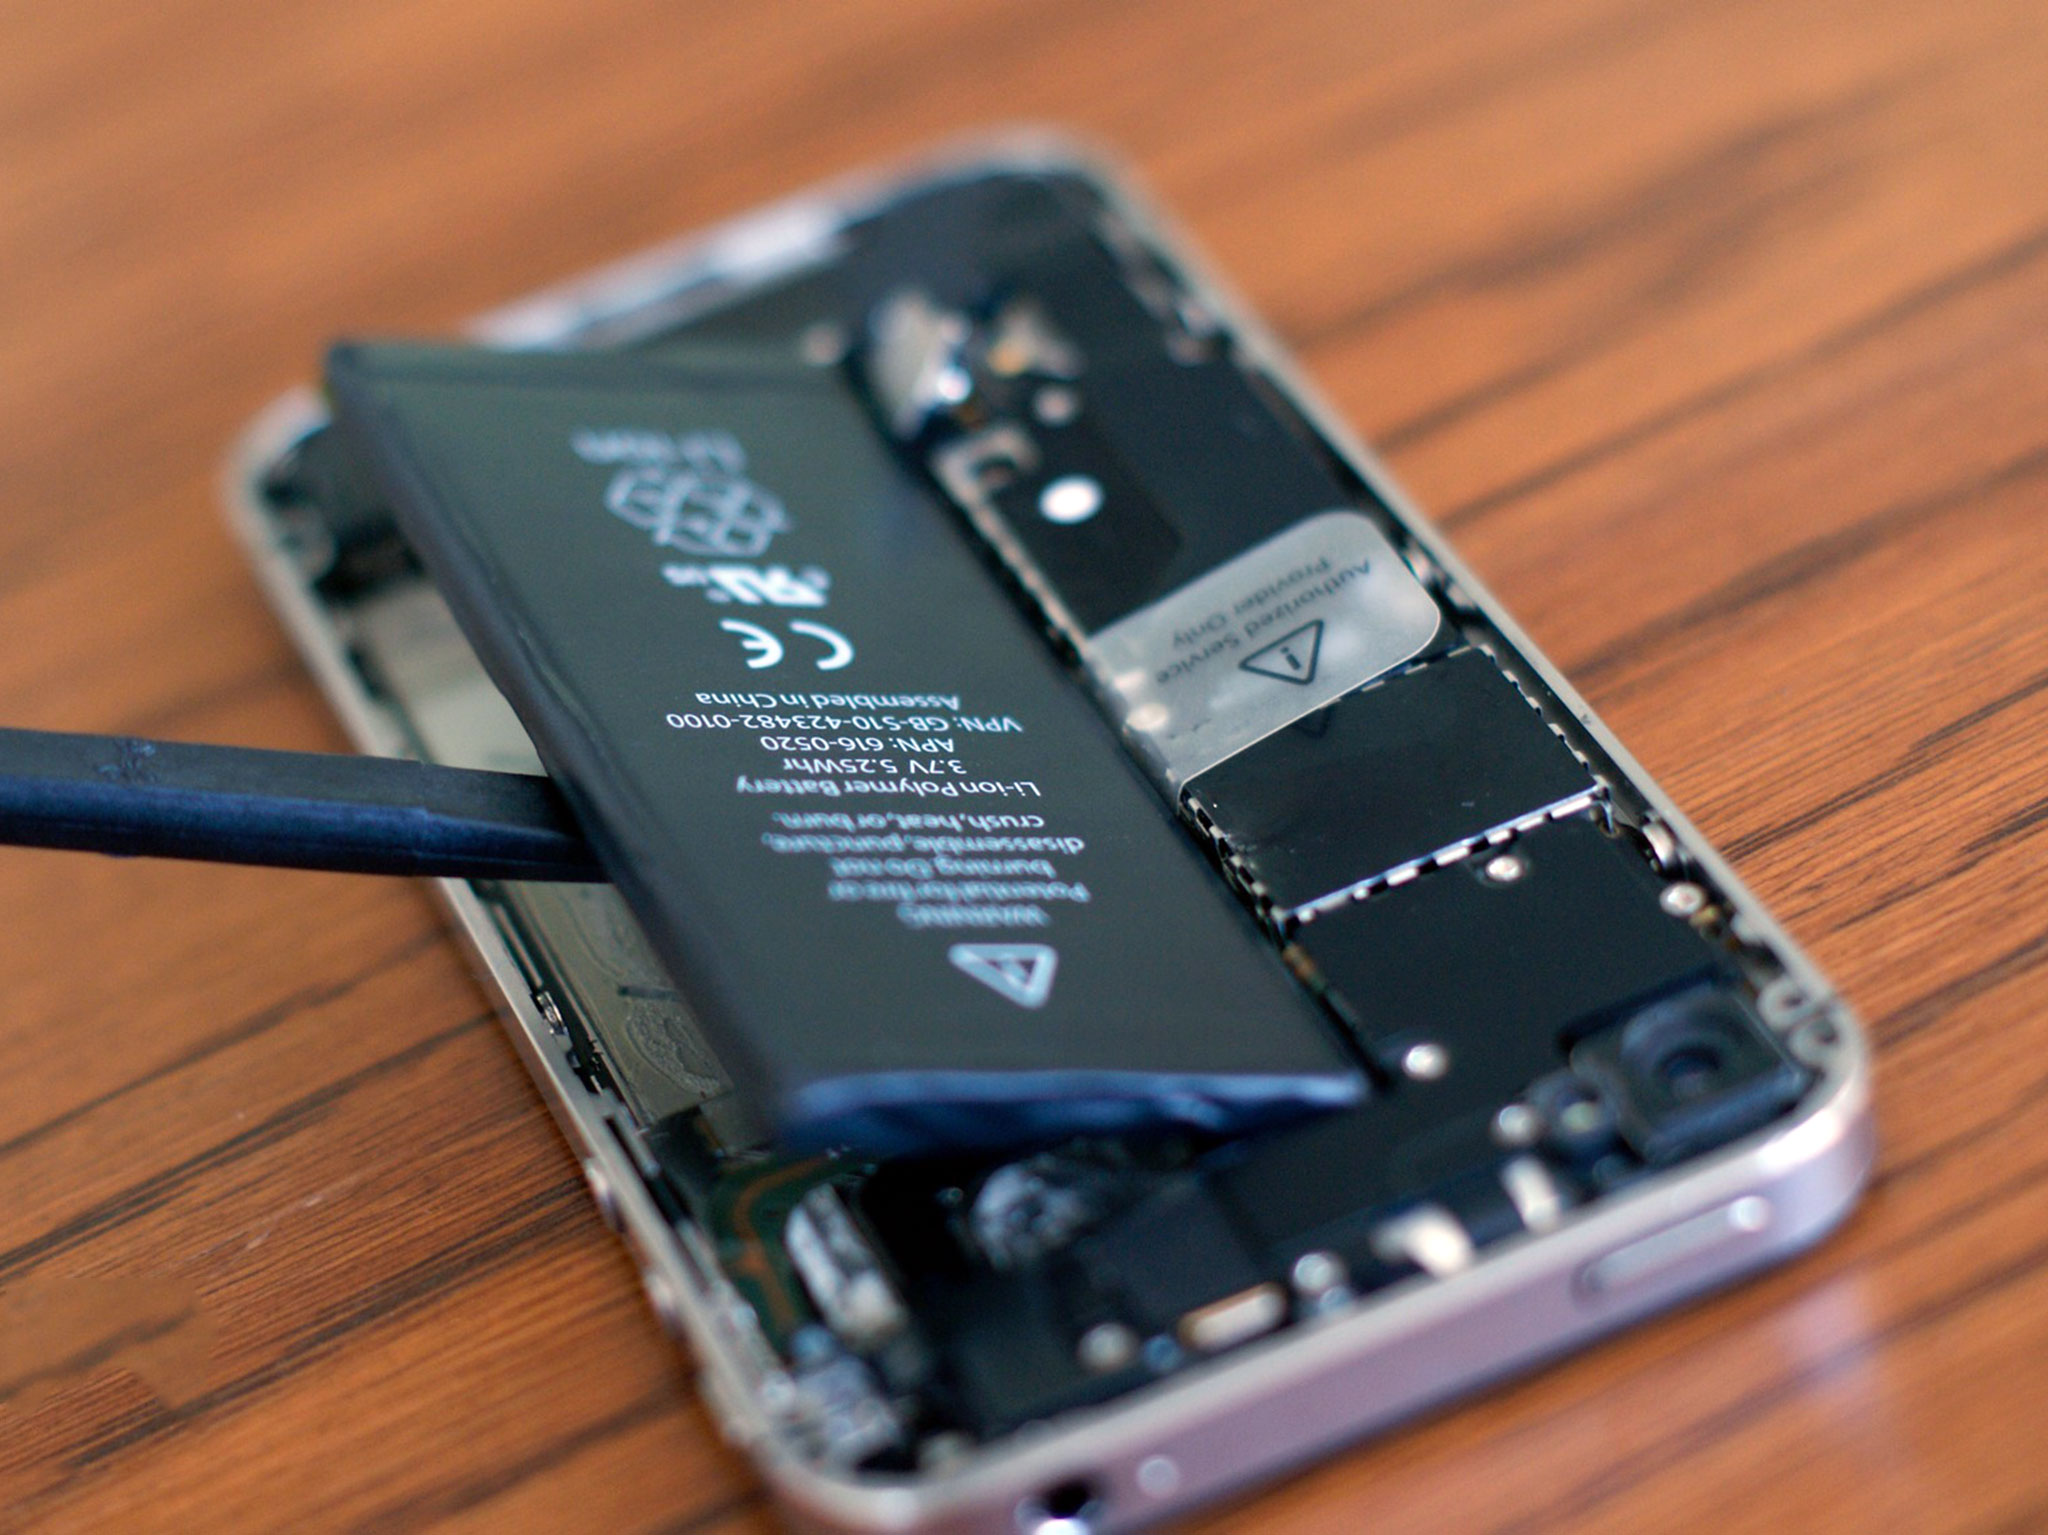 How to replace the battery in an iPhone 4